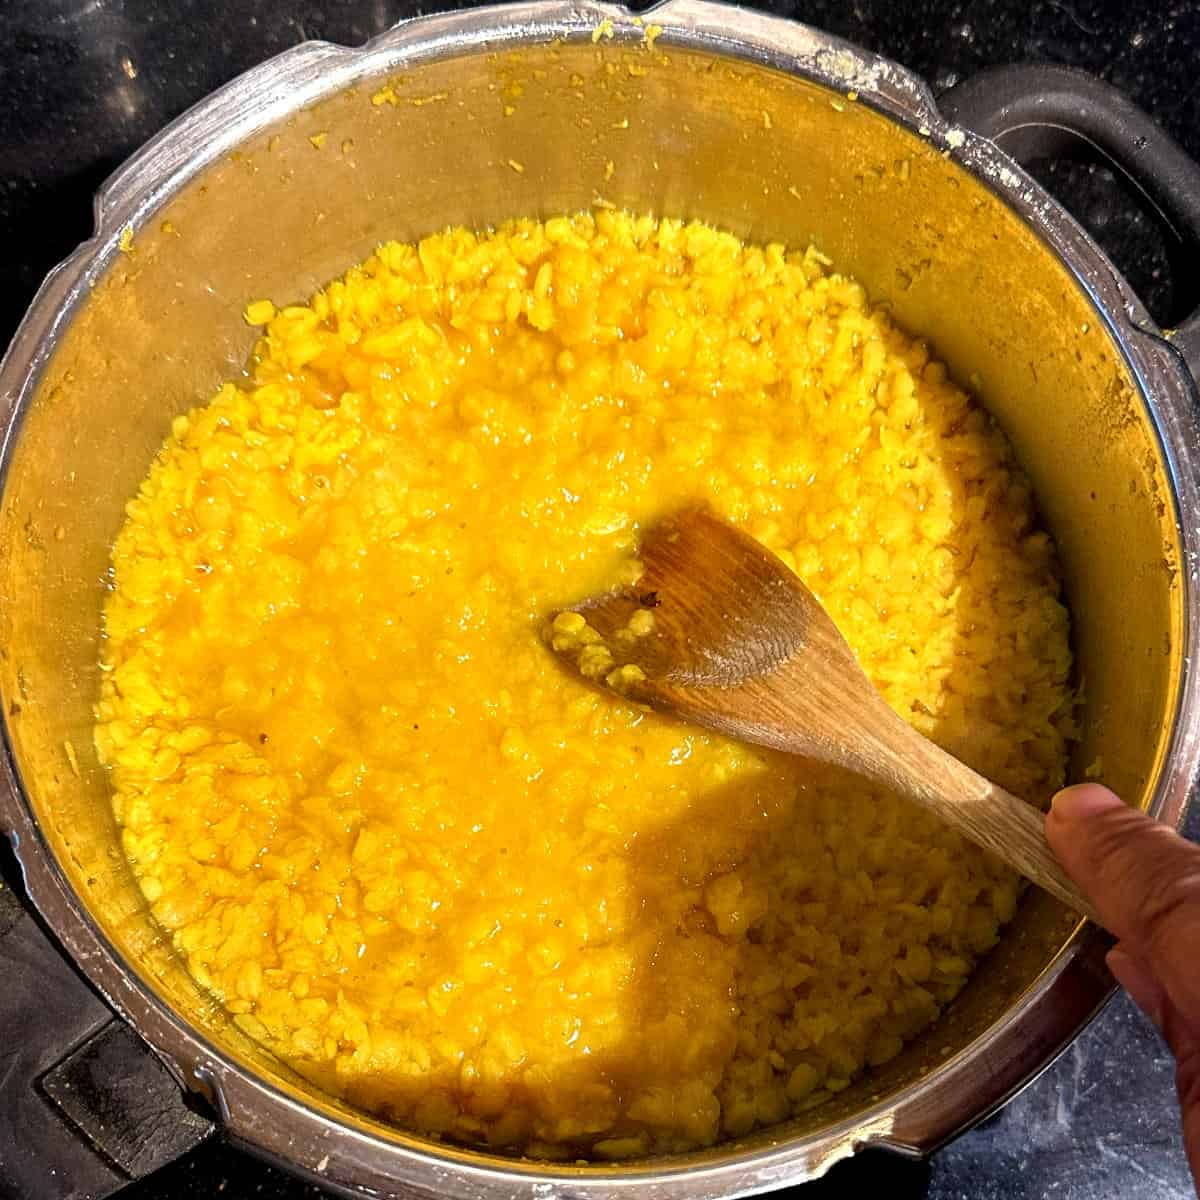 Mashing the cooked dal in pressure cooker with wooden spoon.